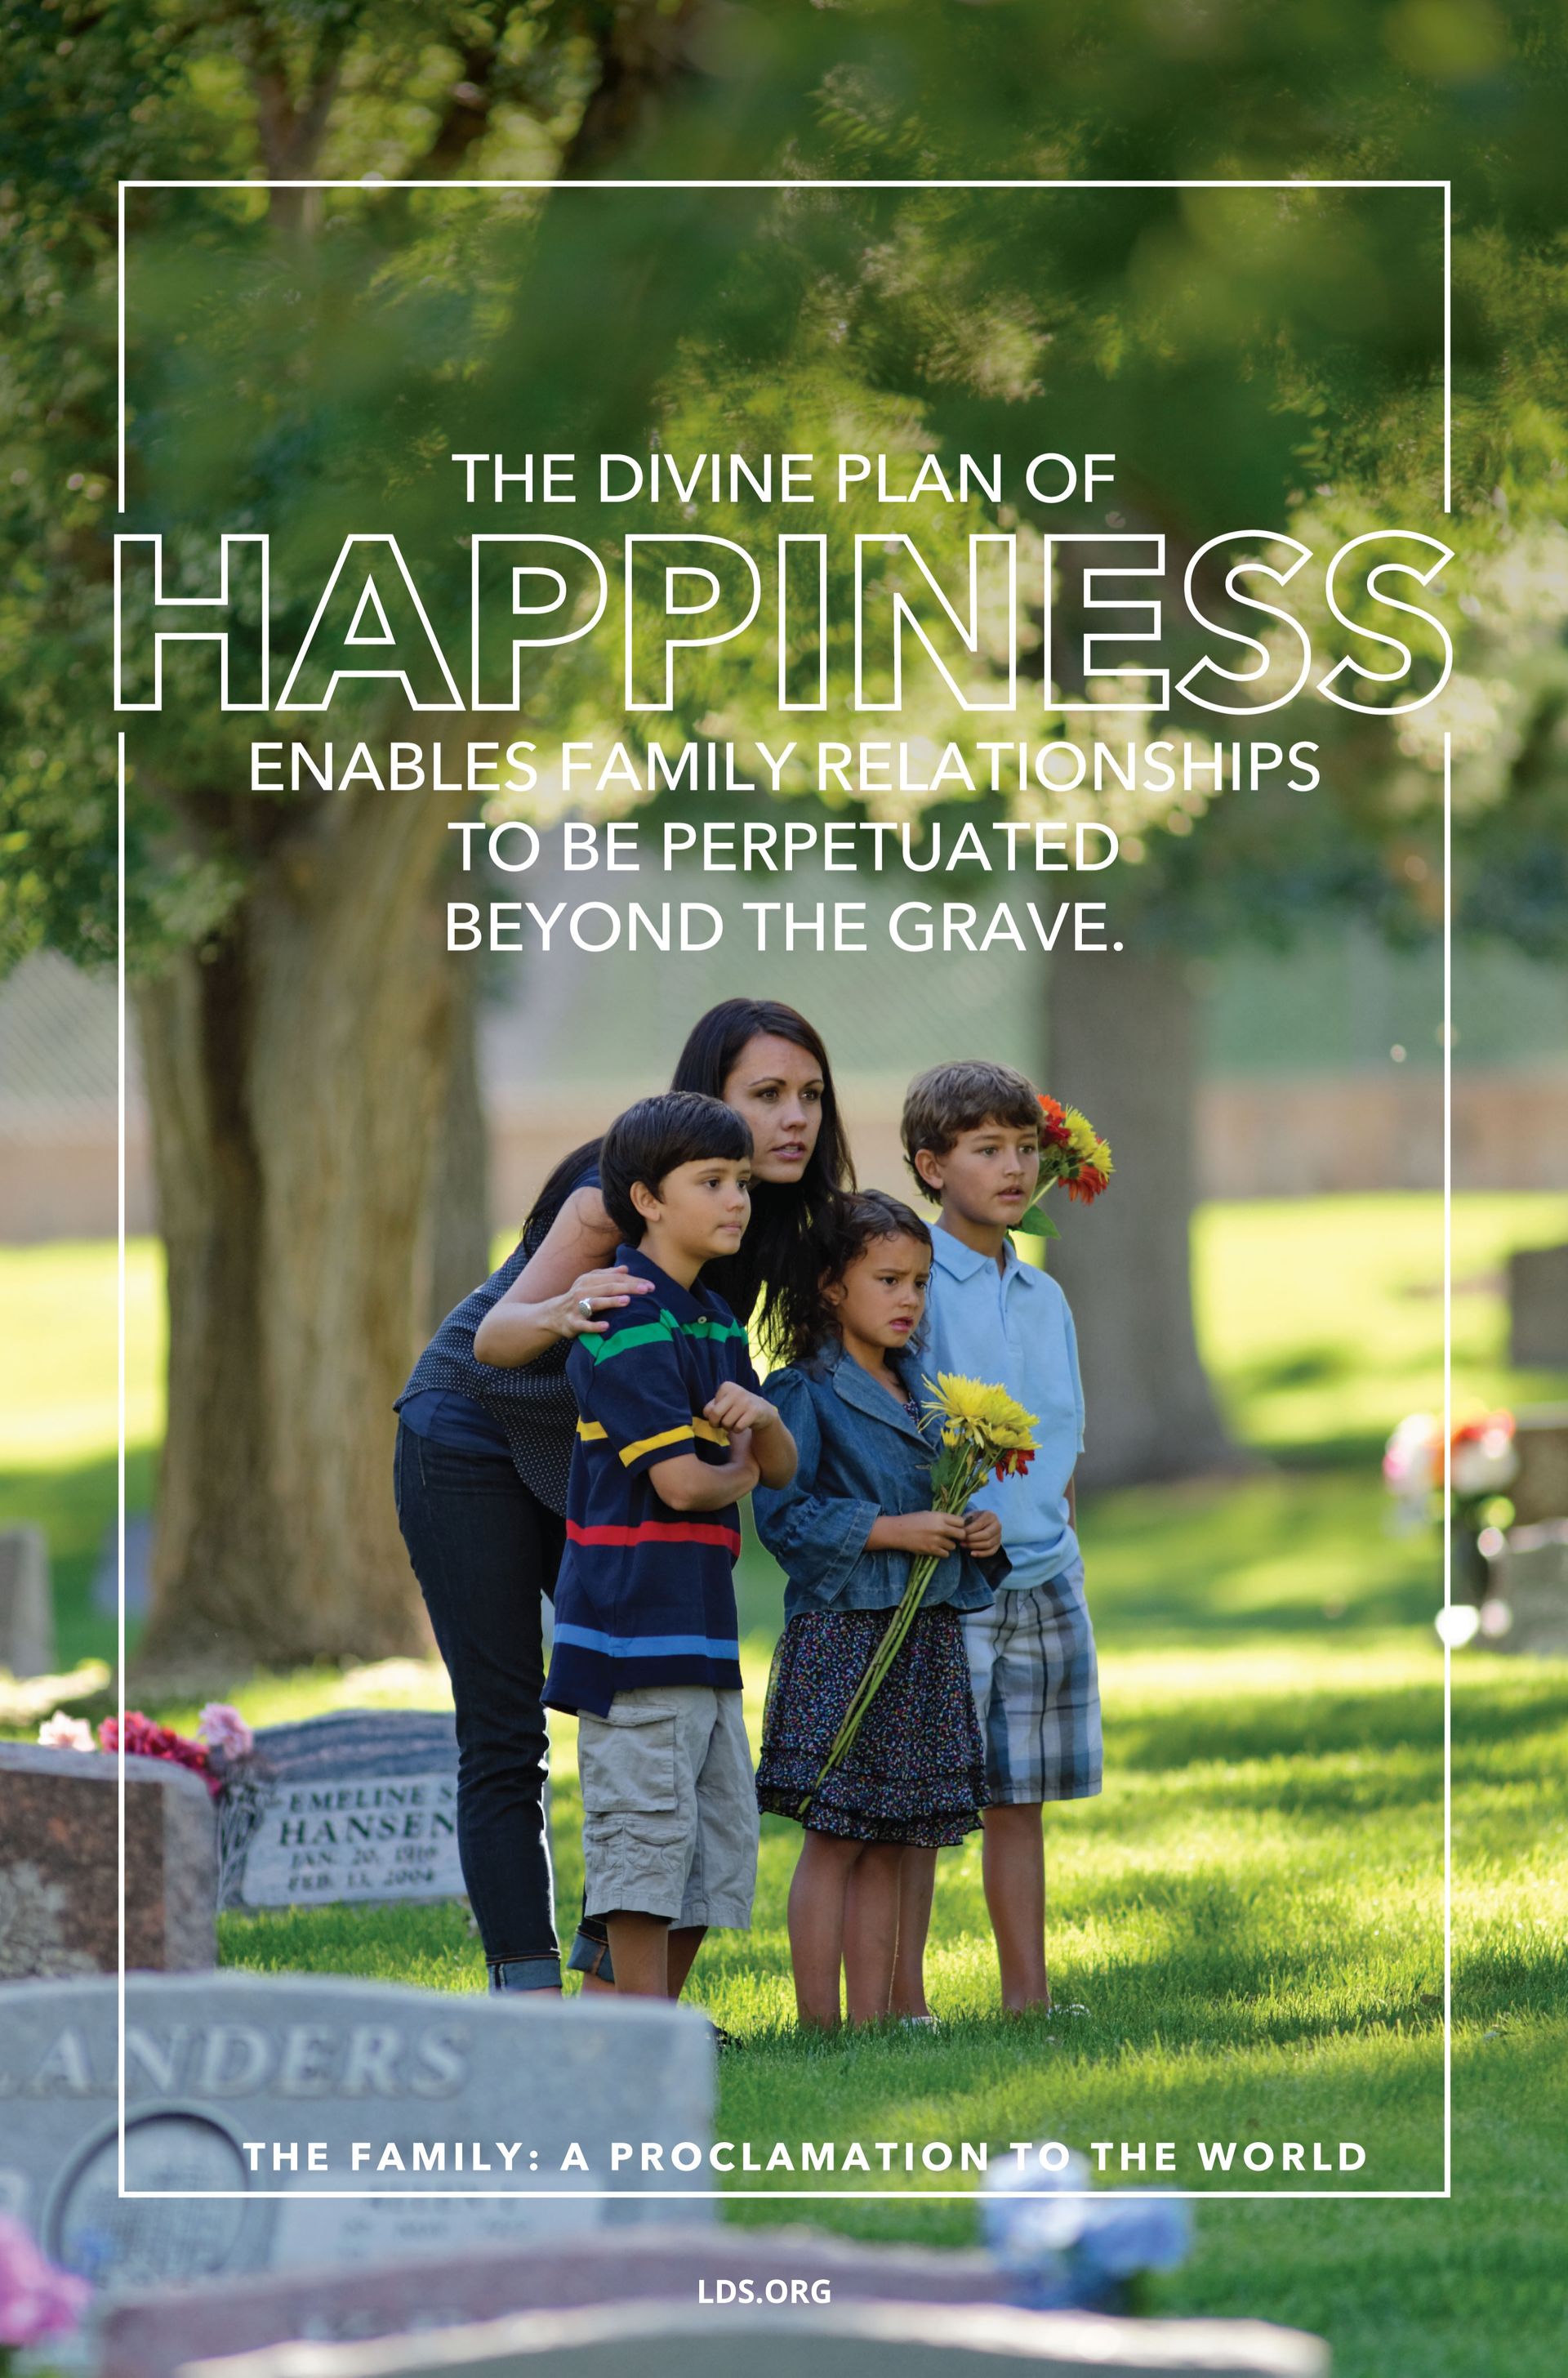 “The divine plan of happiness enables family relationships to be perpetuated beyond the grave.”—“The Family: A Proclamation to the World”